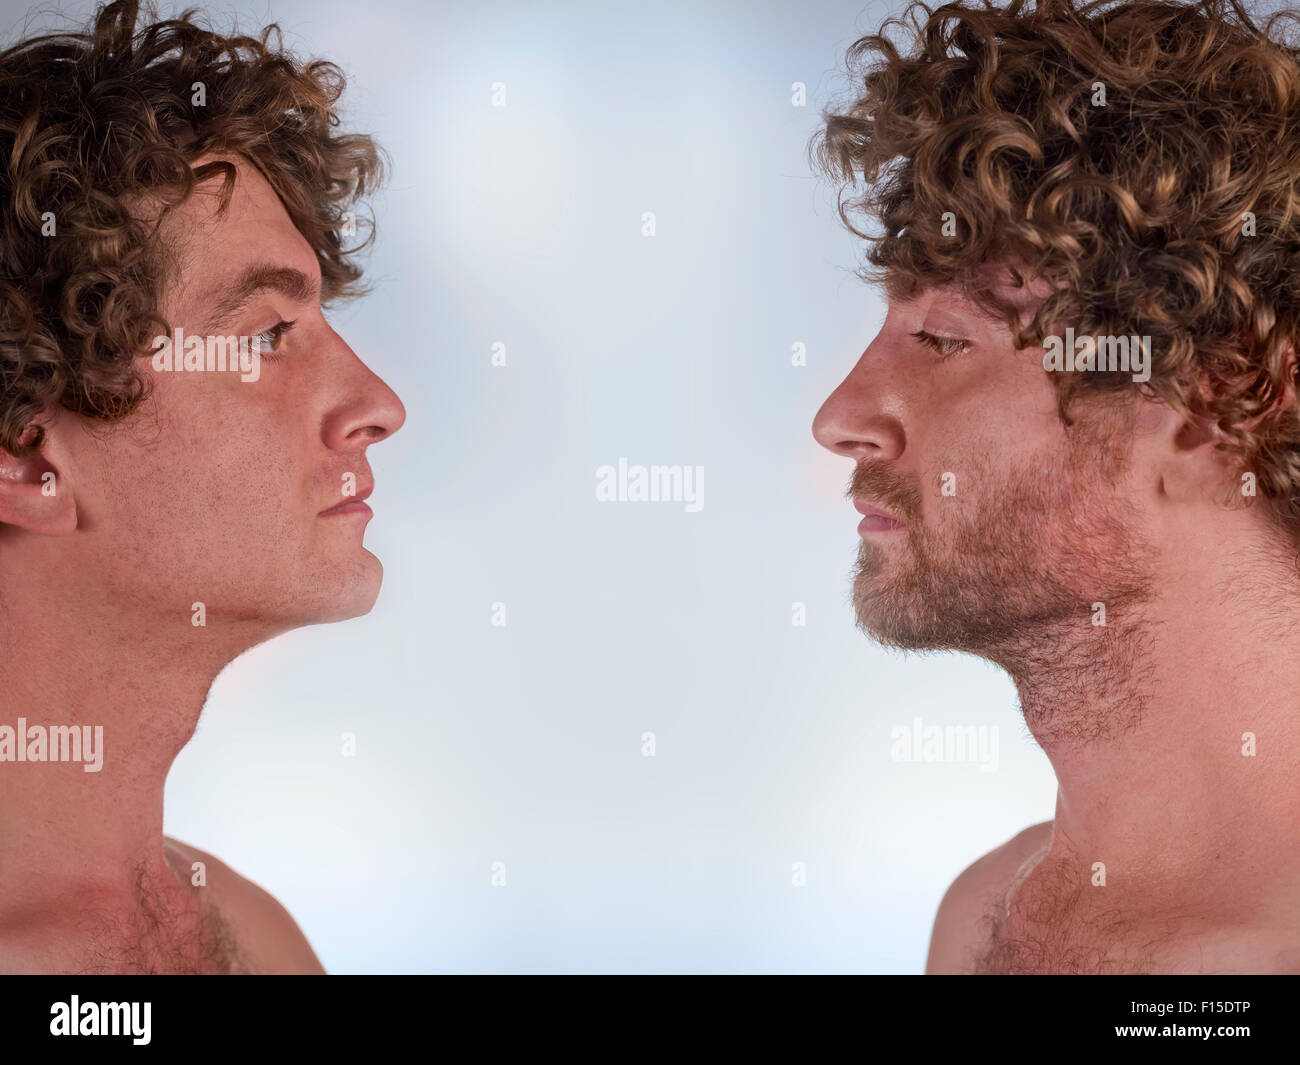 Half shaved man looking at himself with and without a beard Stock Photo